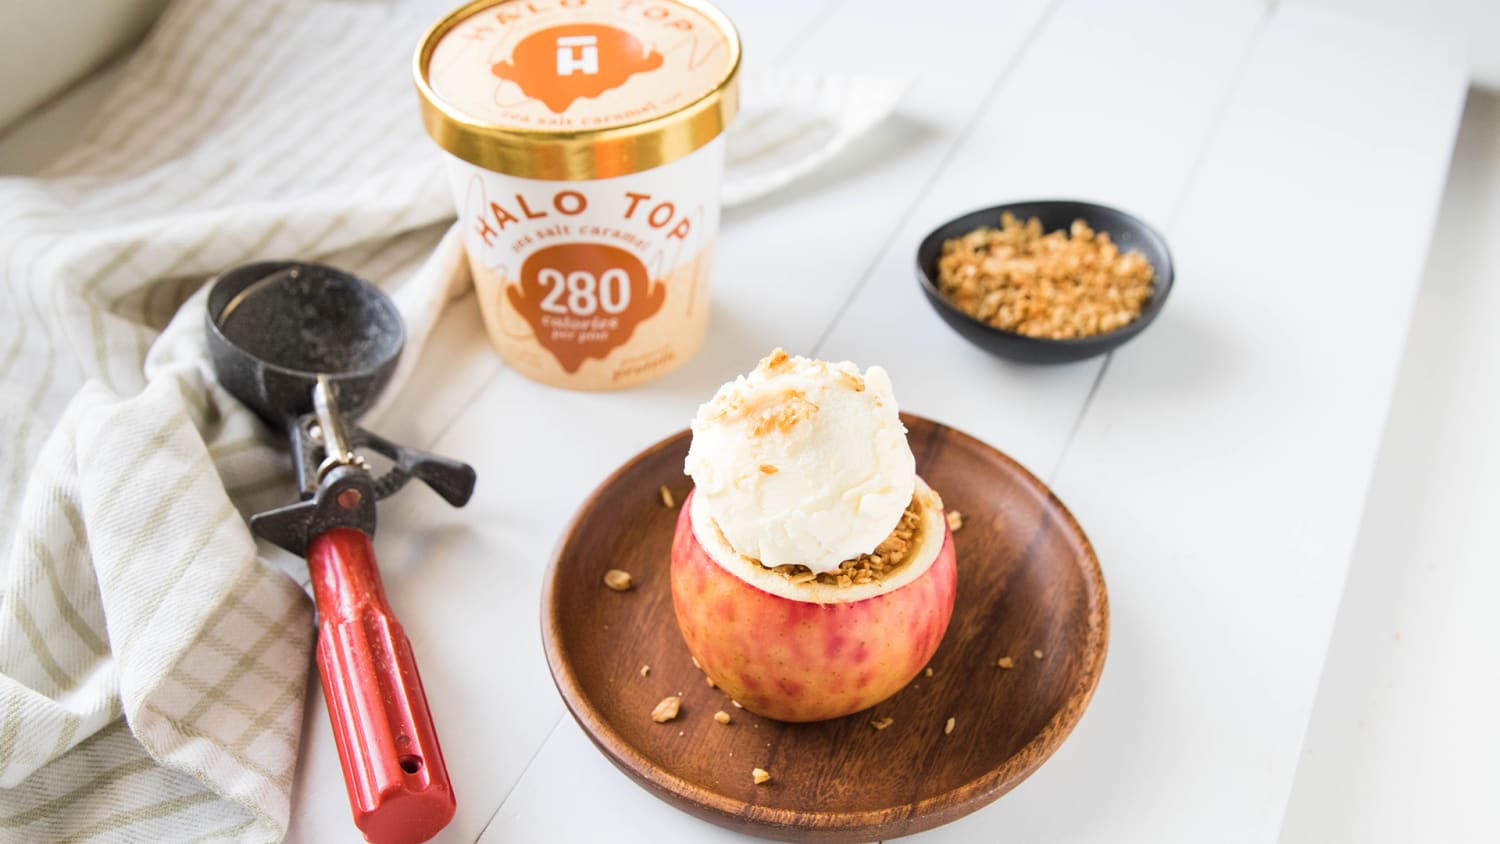 Halo Top makes a pint-sized cooler for ice cream on the go